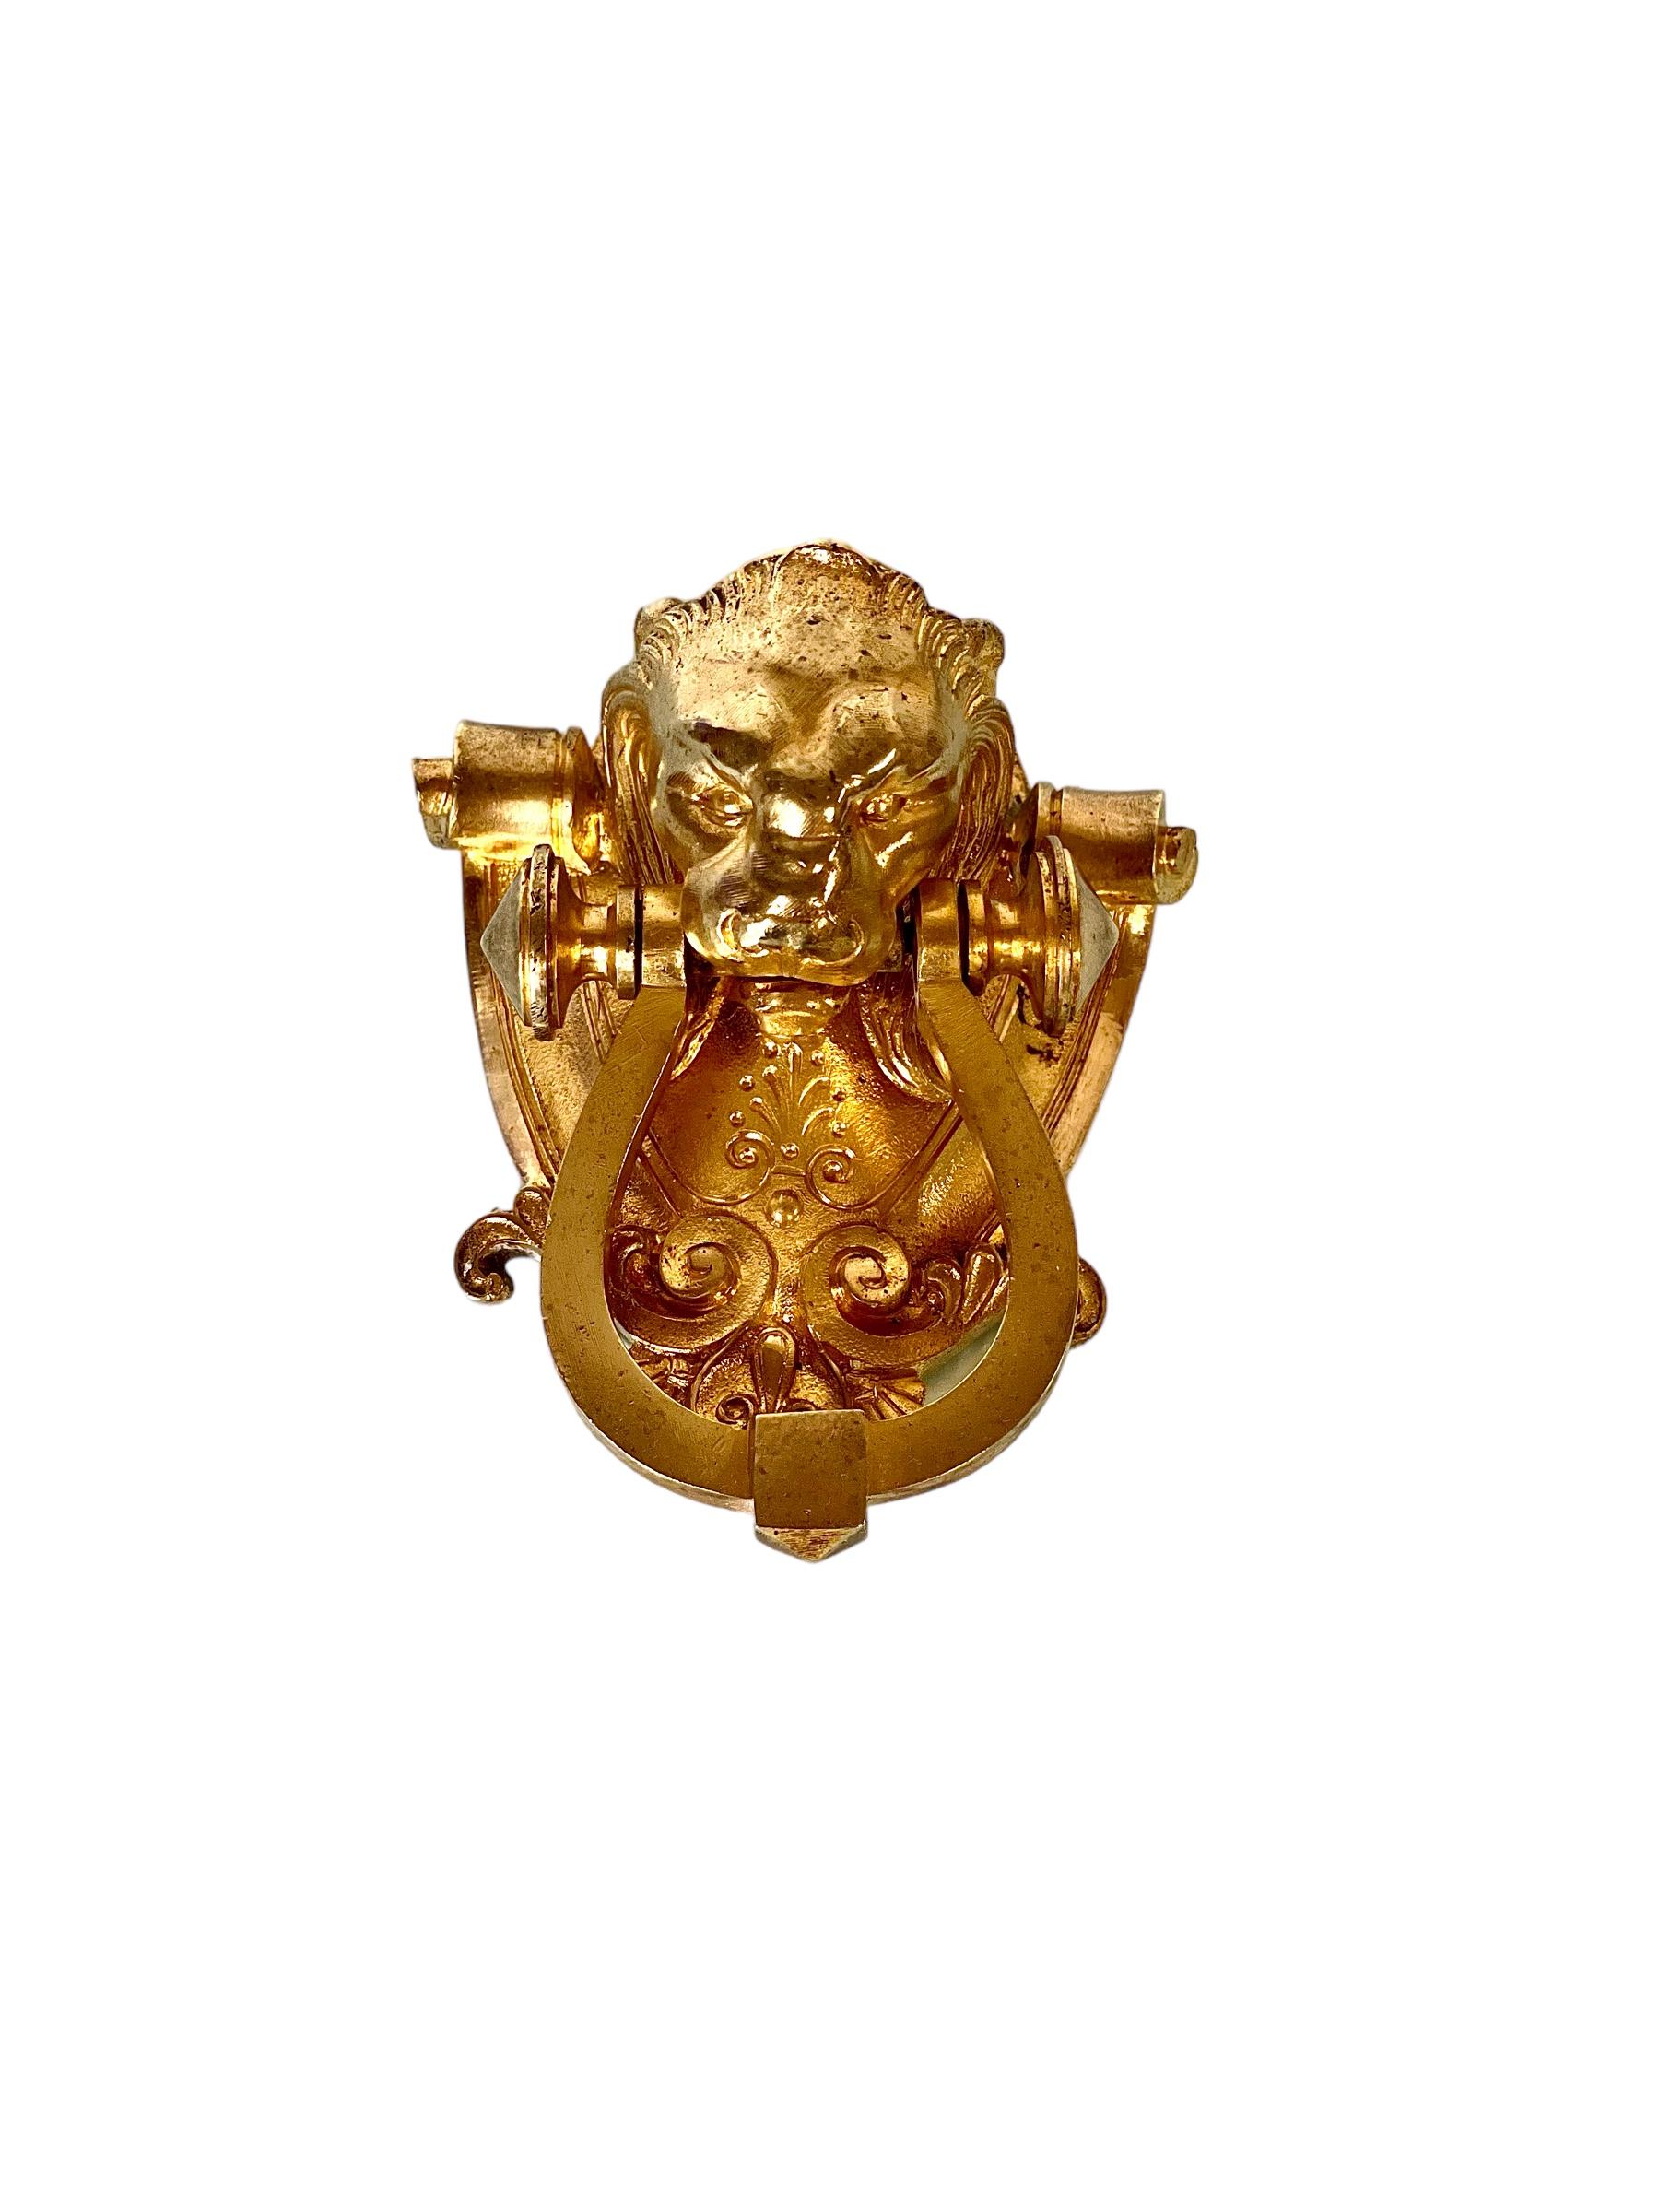 A fabulous antique lion's head door knocker in gilt bronze, dating from the 19th century. Traditionally regarded as the king of beasts, the lion's head symbolises power, strength, pride and protection, and has been a popular choice as the theme for